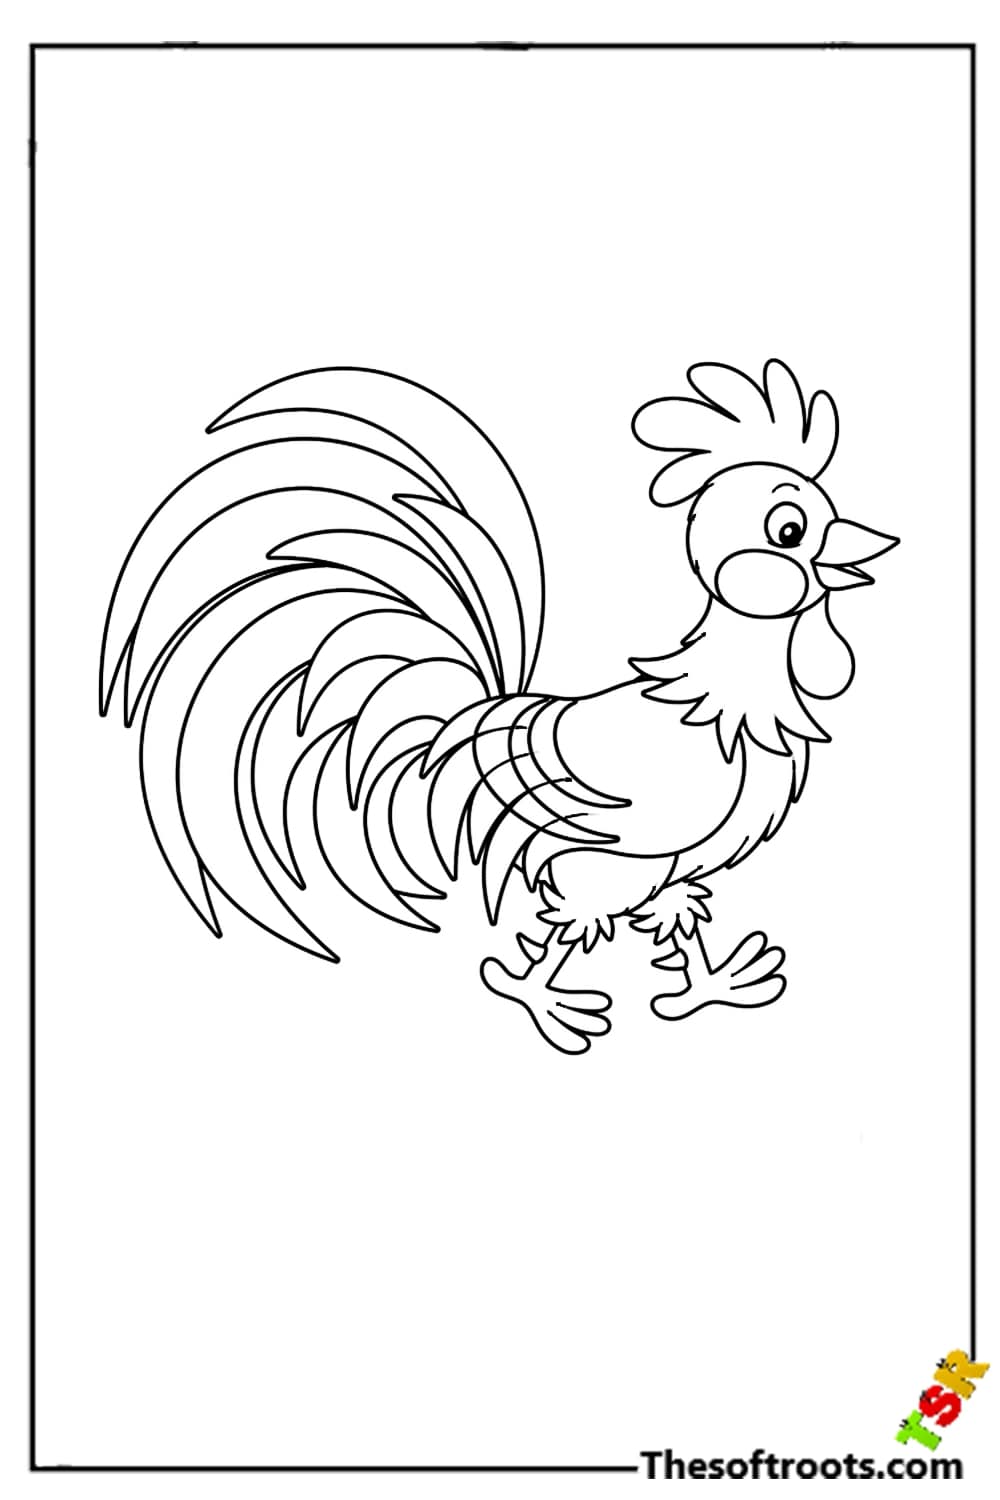 Roaster coloring pages